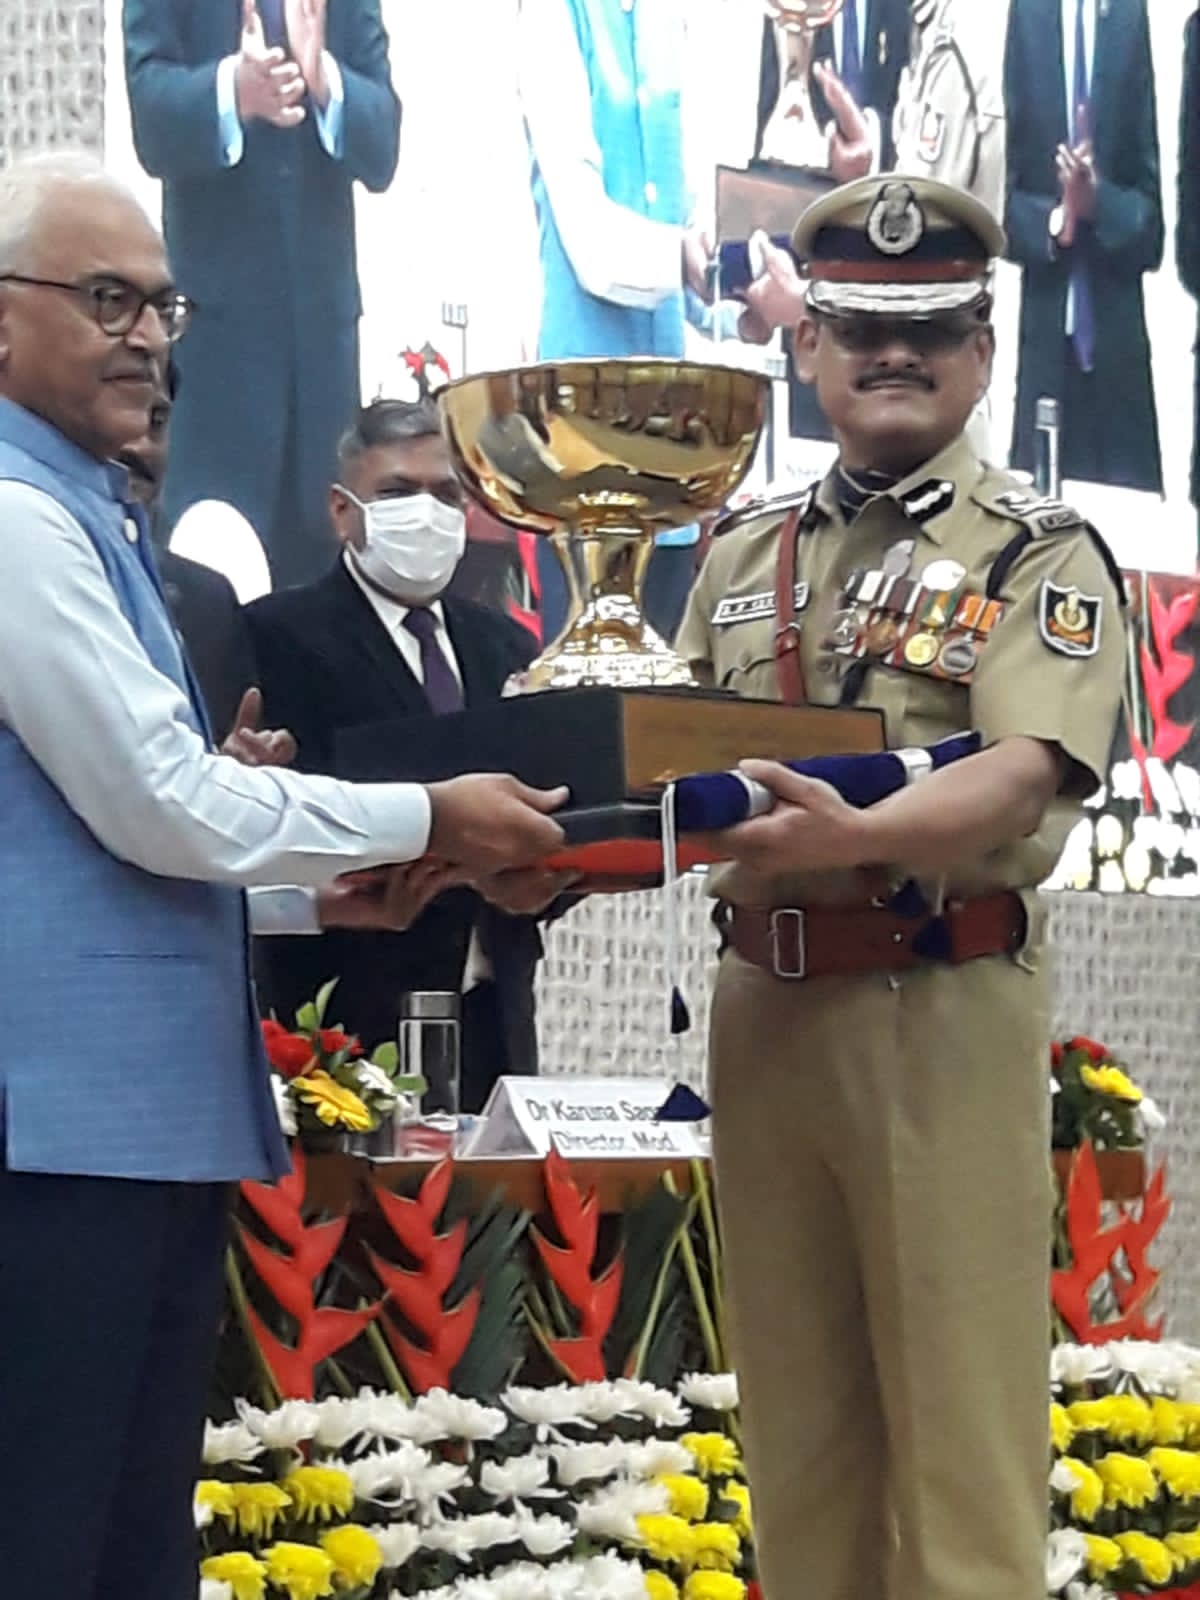 Biju Patnaik State Police Academy Receives Union Home Minister’s Trophy